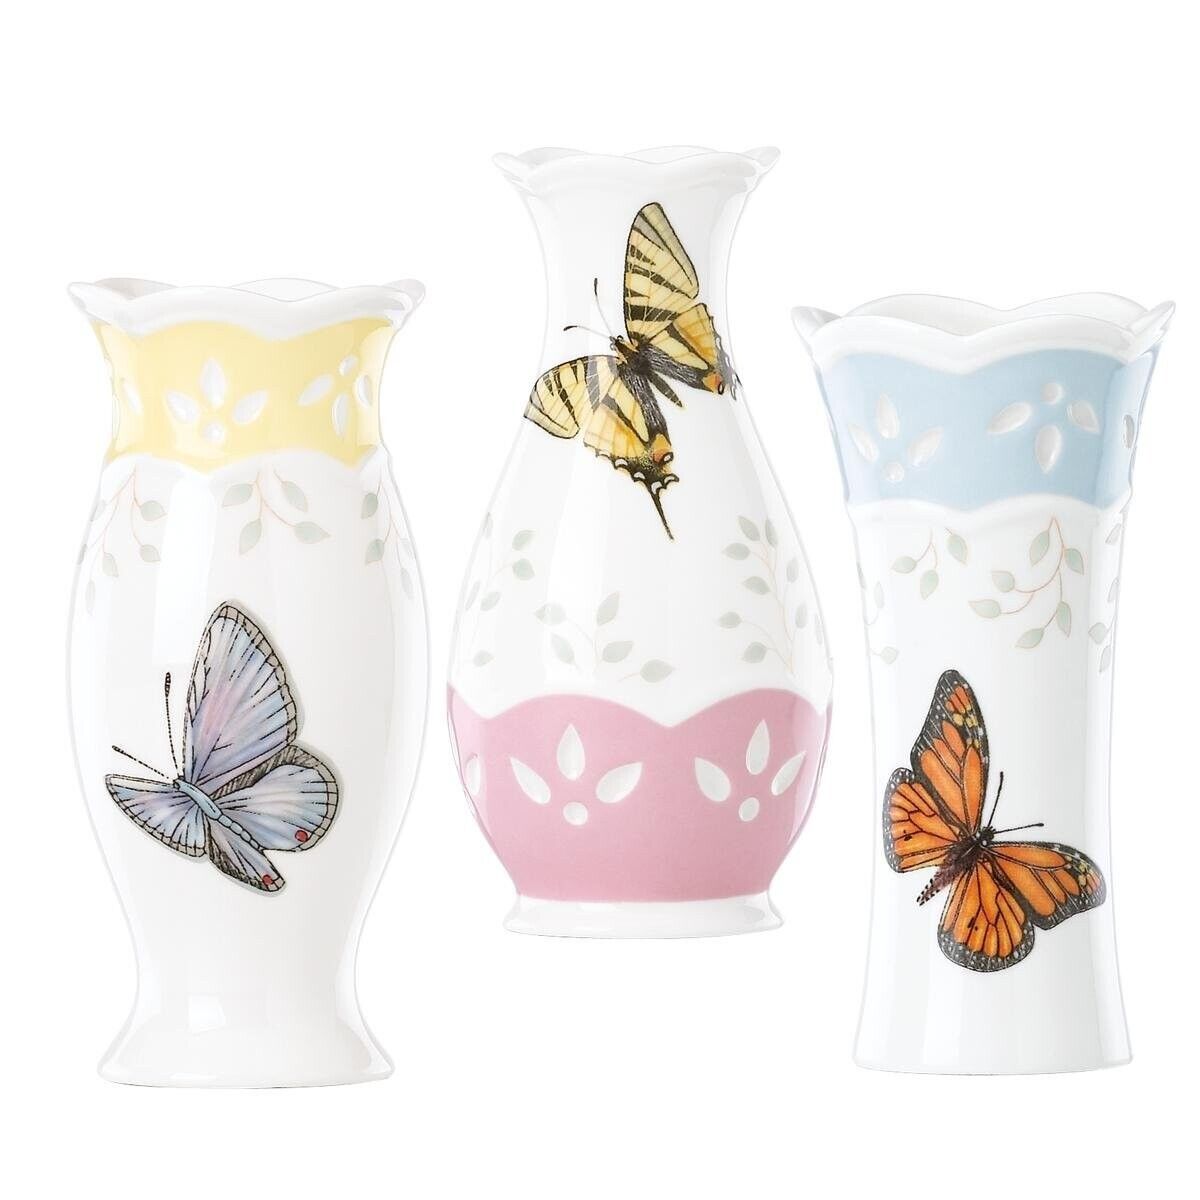 NIB 3 Petite Bud Vases BUTTERFLY MEADOW LENOX Louise Le Layer about 5\